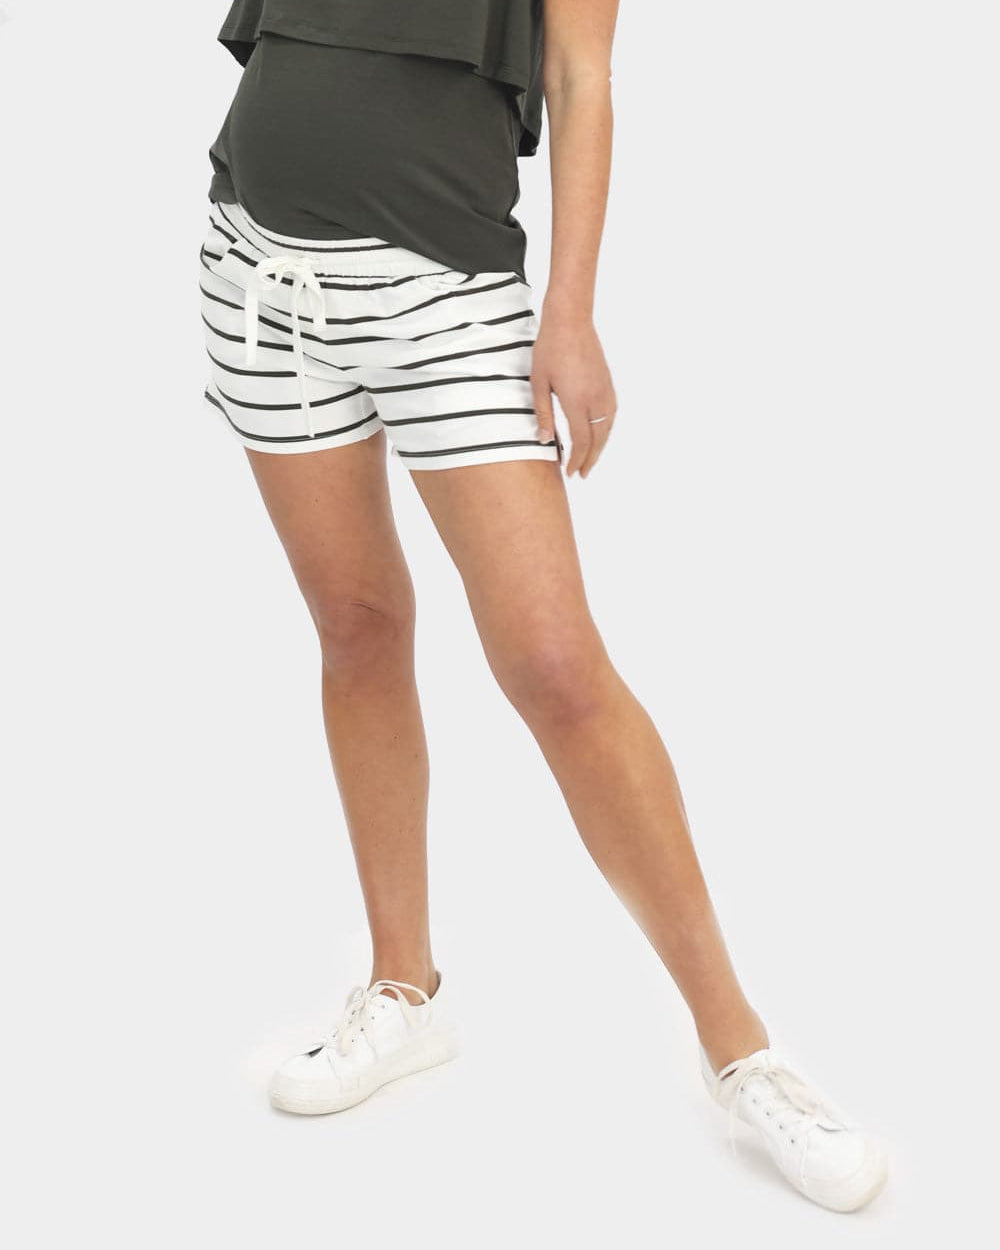 Maternity Cotton Shorts in Khaki Striped - Angel Maternity - Maternity clothes - shop online (6593186136167)